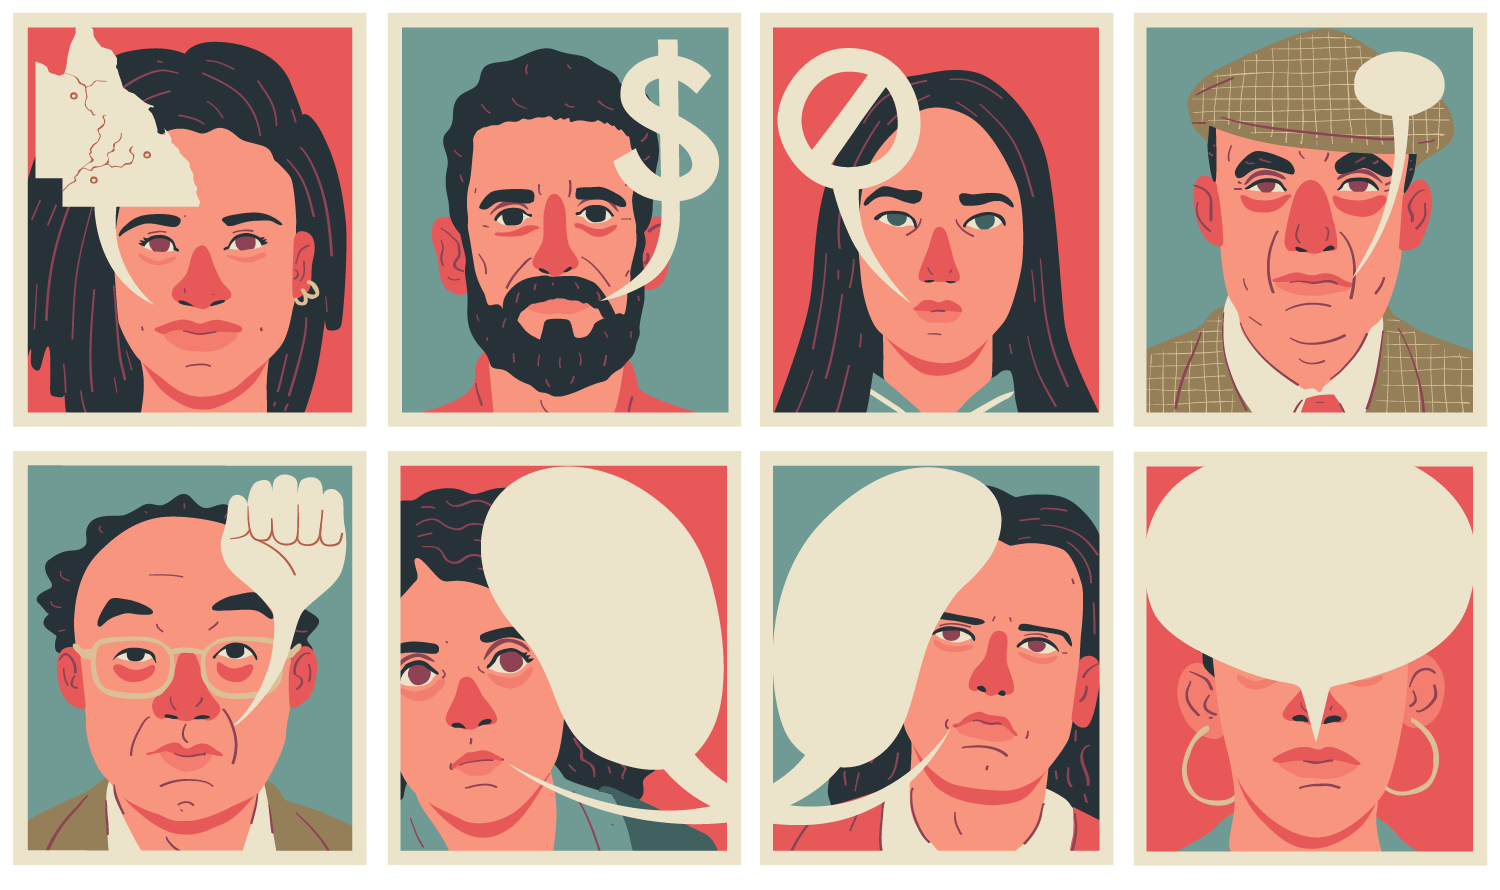 Grid of illustrated portraits of people with speech bubbles coming out of their mouths